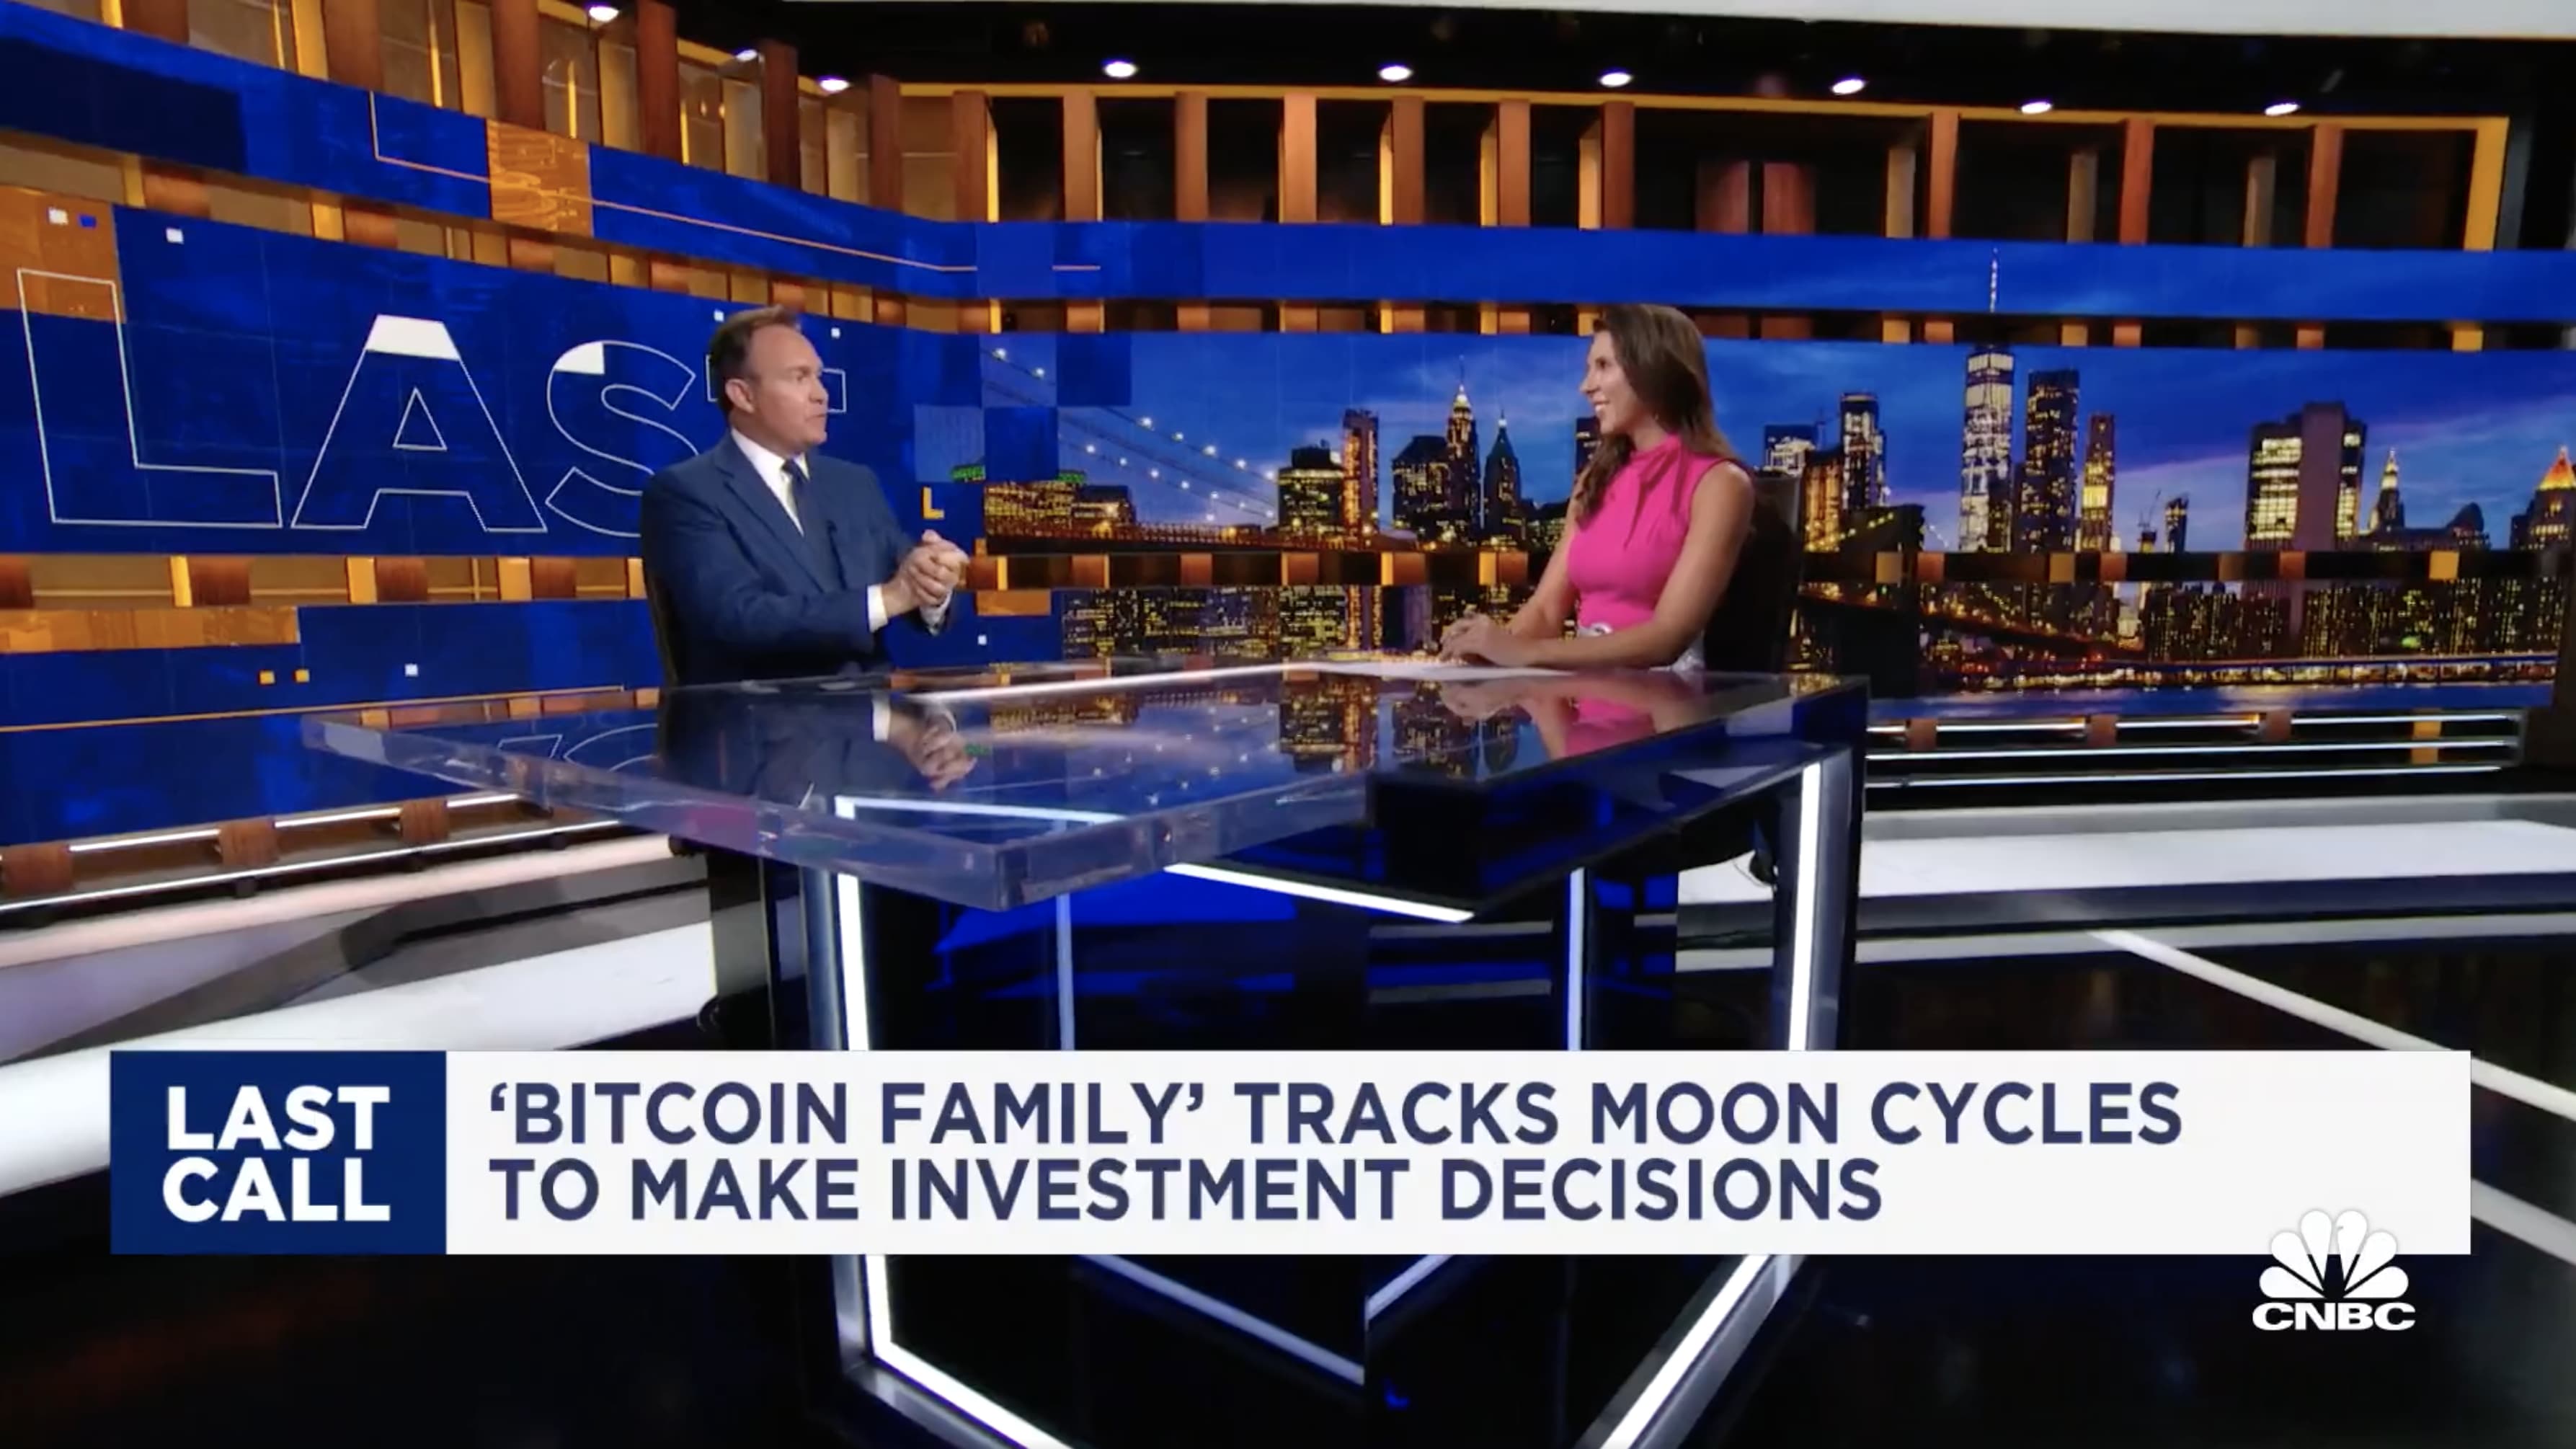 'Bitcoin Family' tracks moon cycles to make crypto investment decisions